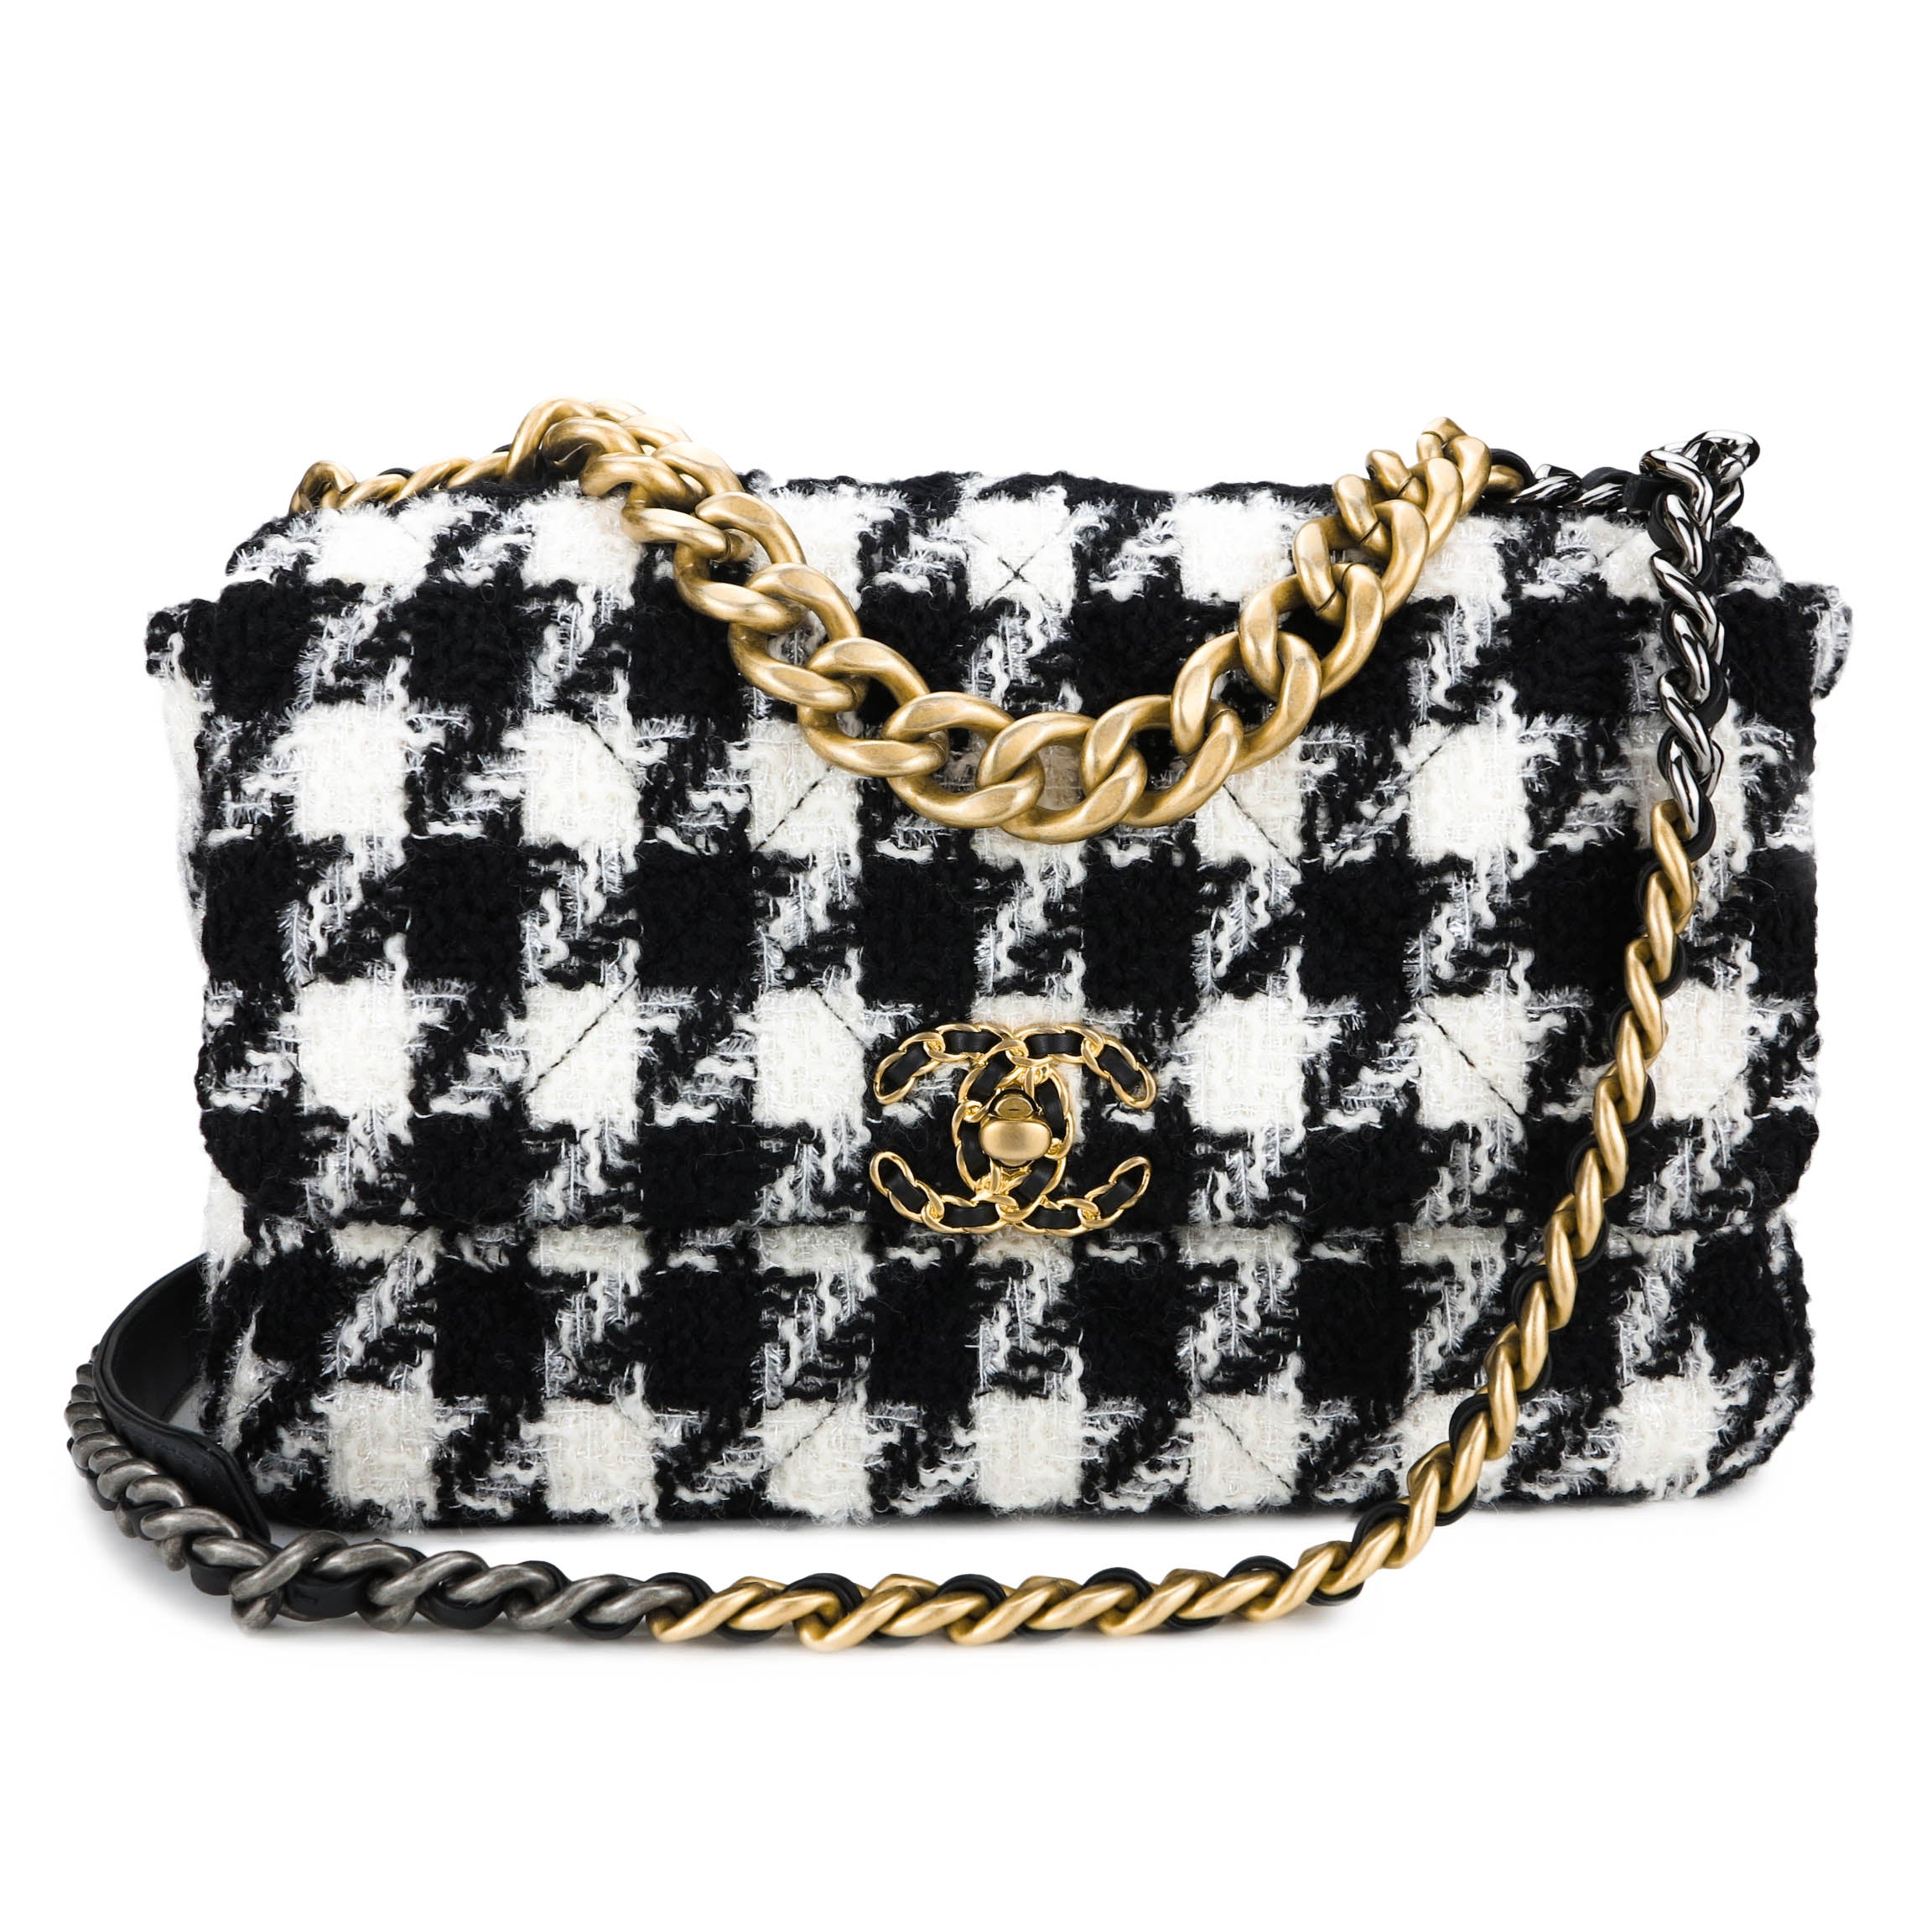 CHANEL CHANEL 19 Medium Flap Bag in Black And White Houndstooth Tweed